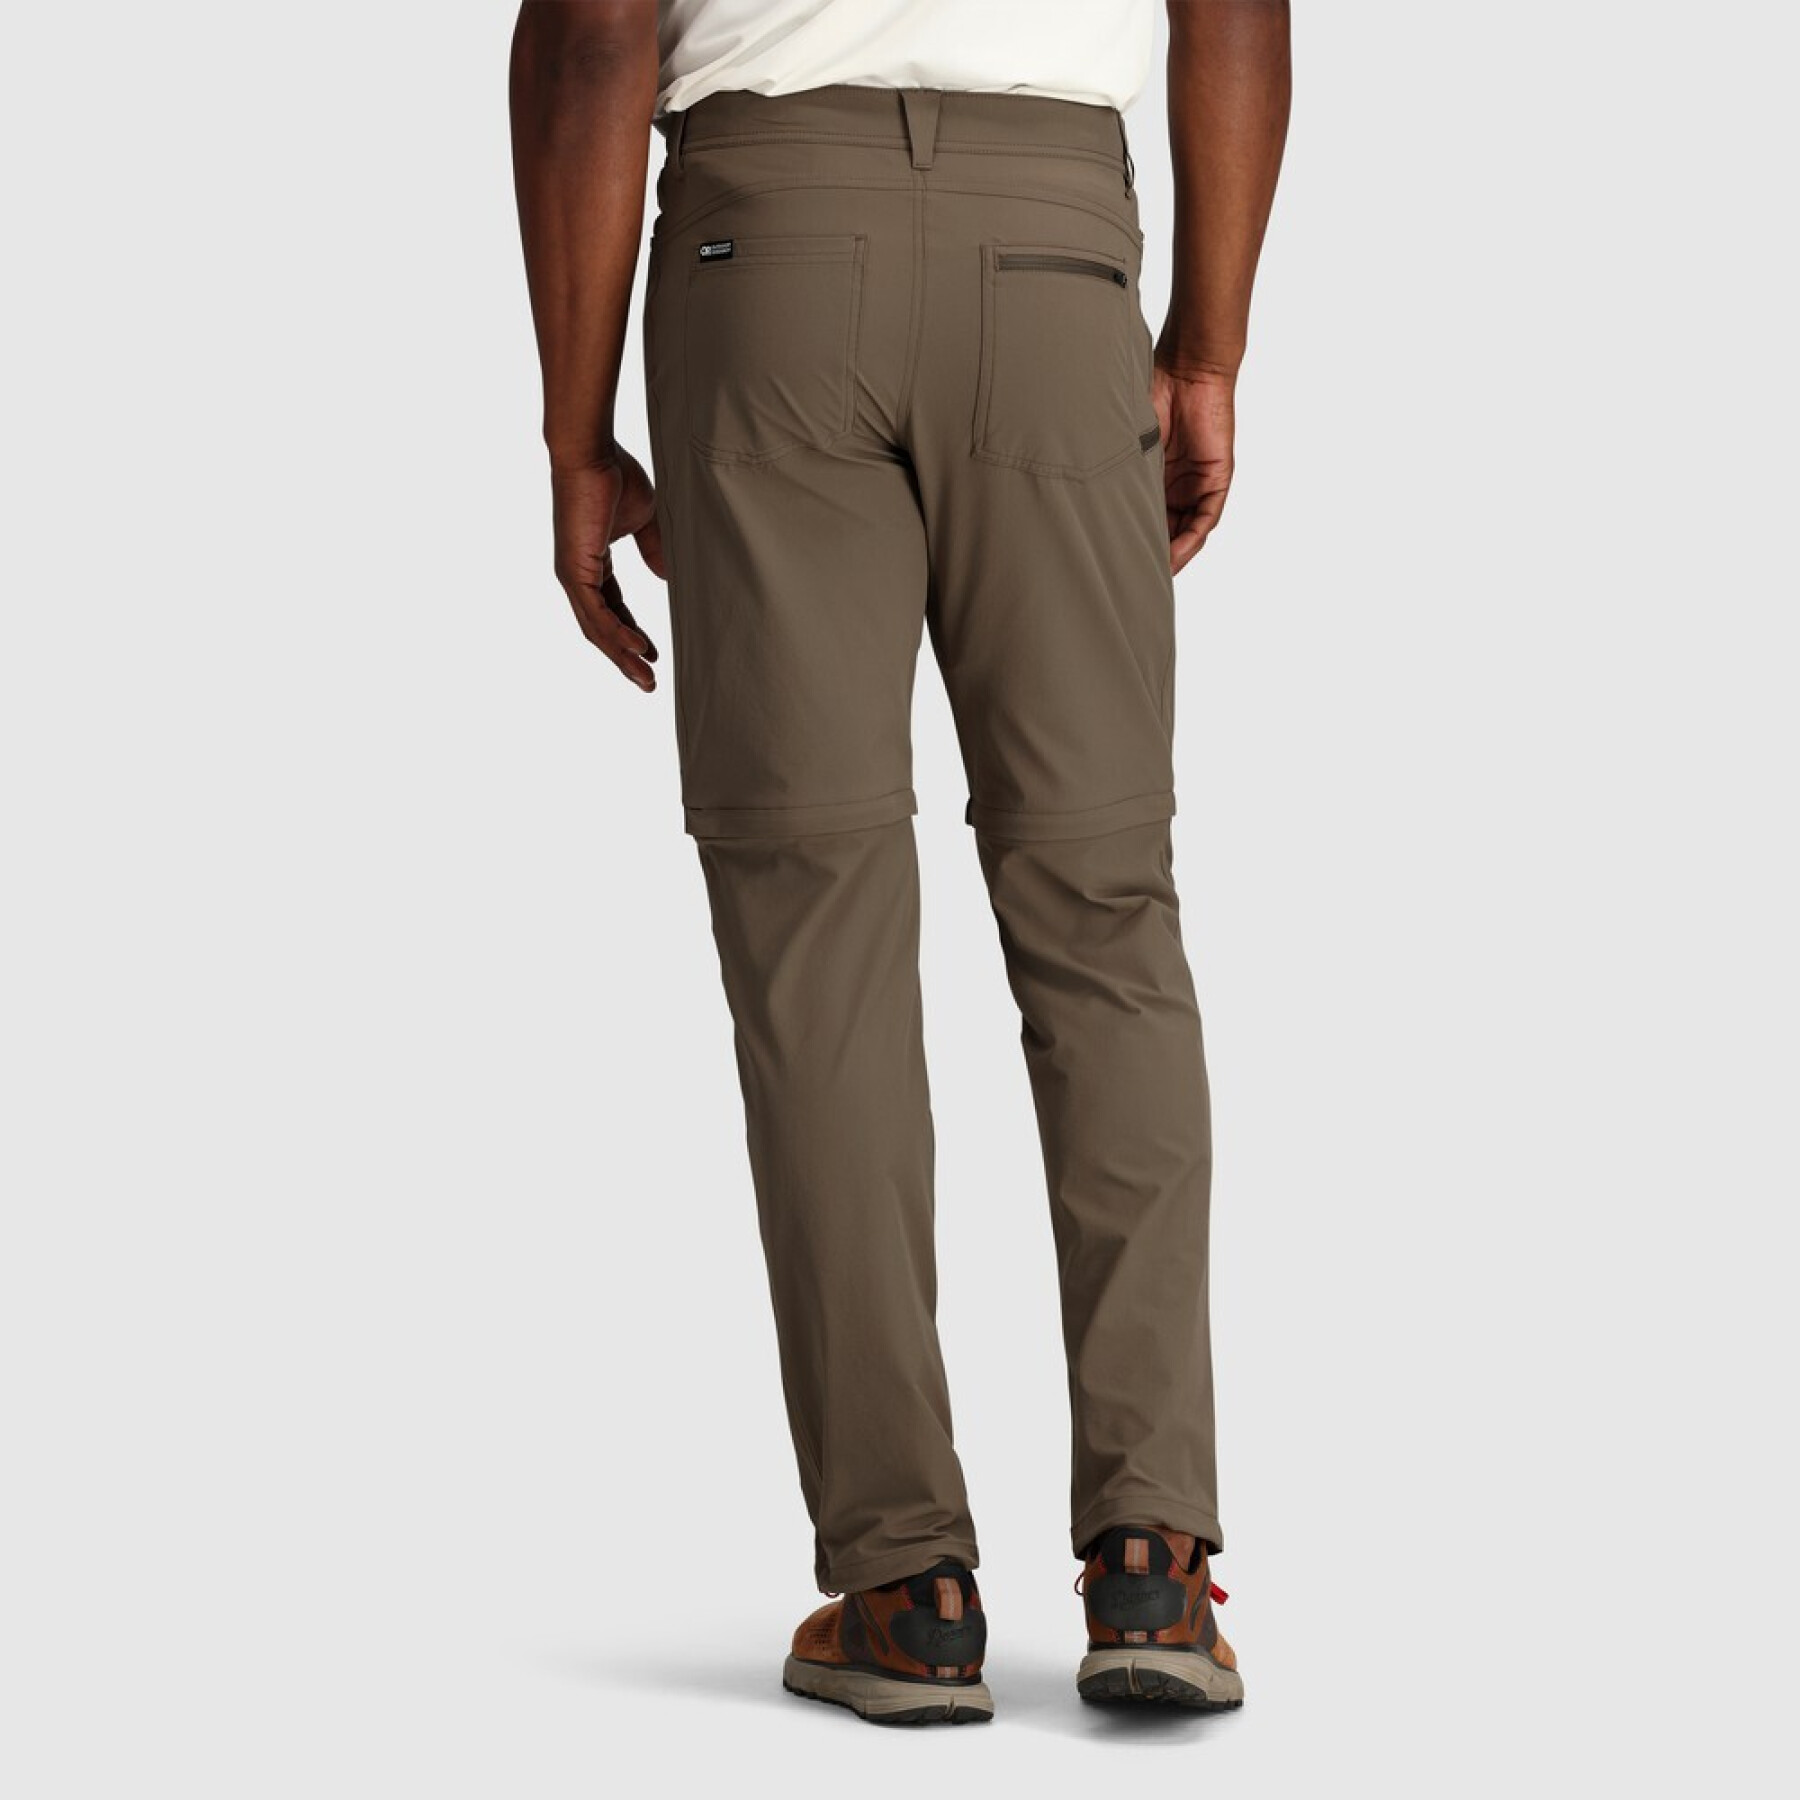 Convertible pants Outdoor Research Ferrosi 32"